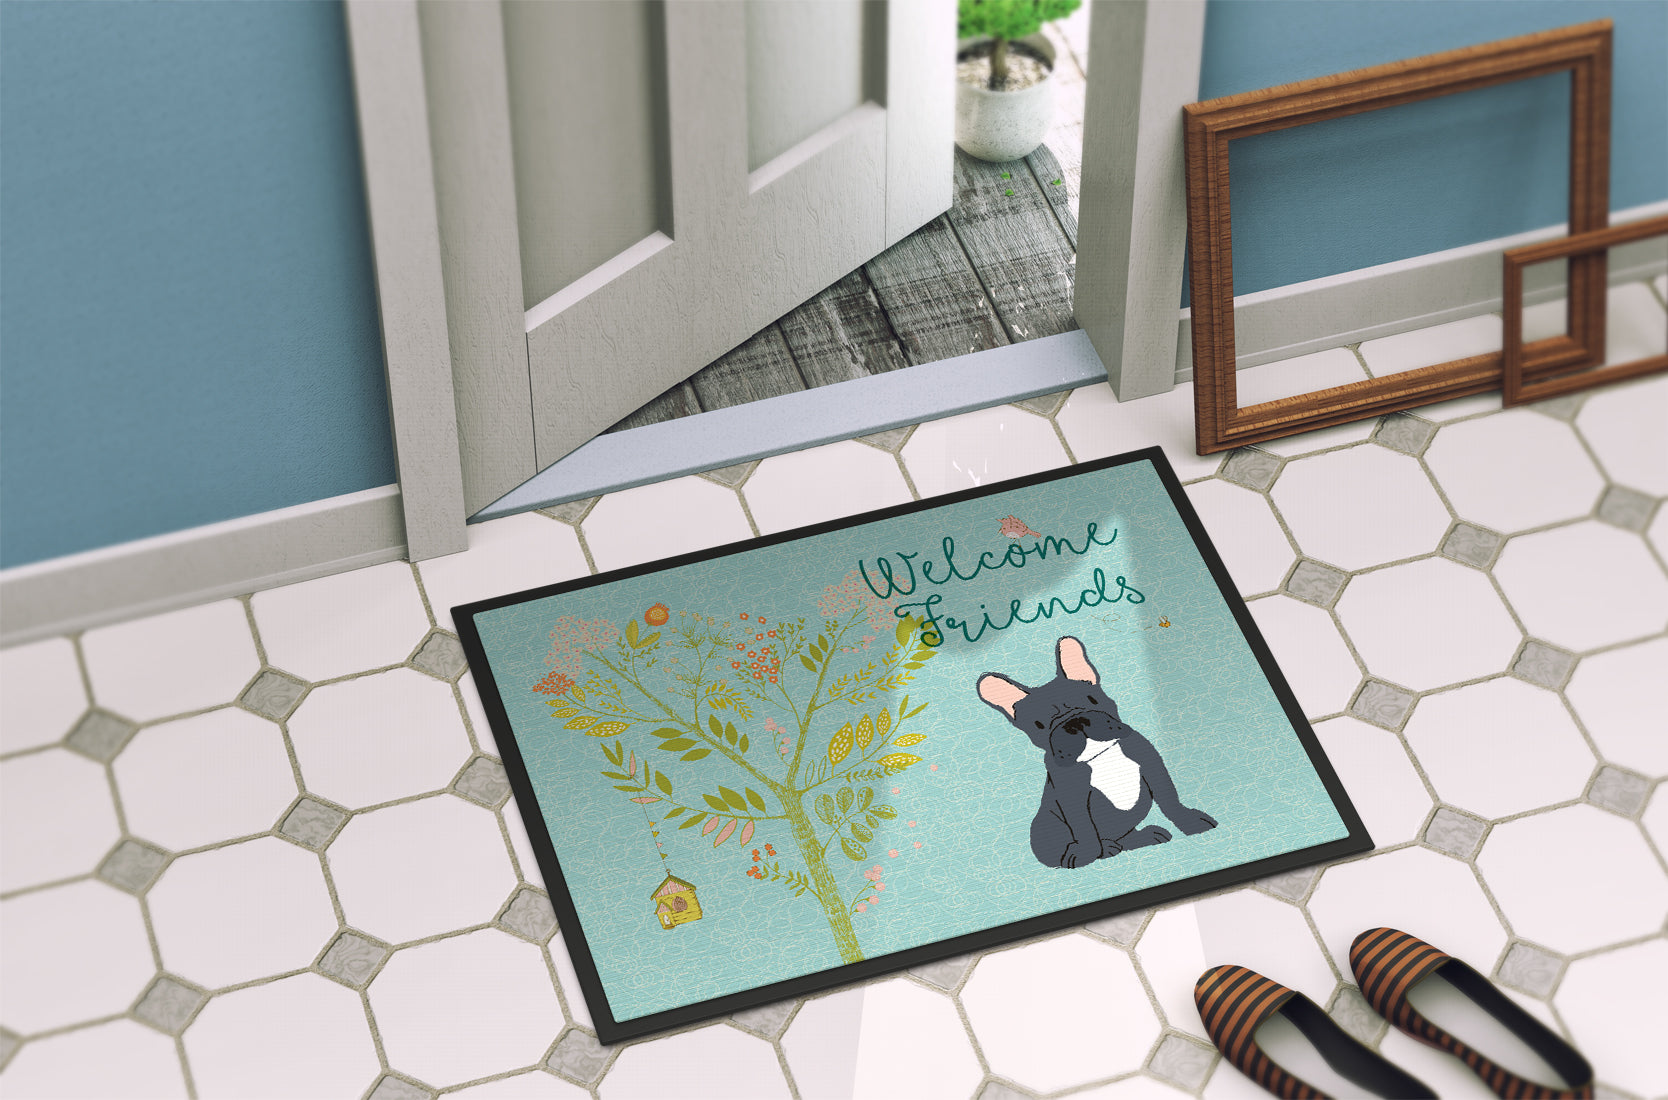 Welcome Friends Black French Bulldog Indoor or Outdoor Mat 18x27 BB7632MAT - the-store.com